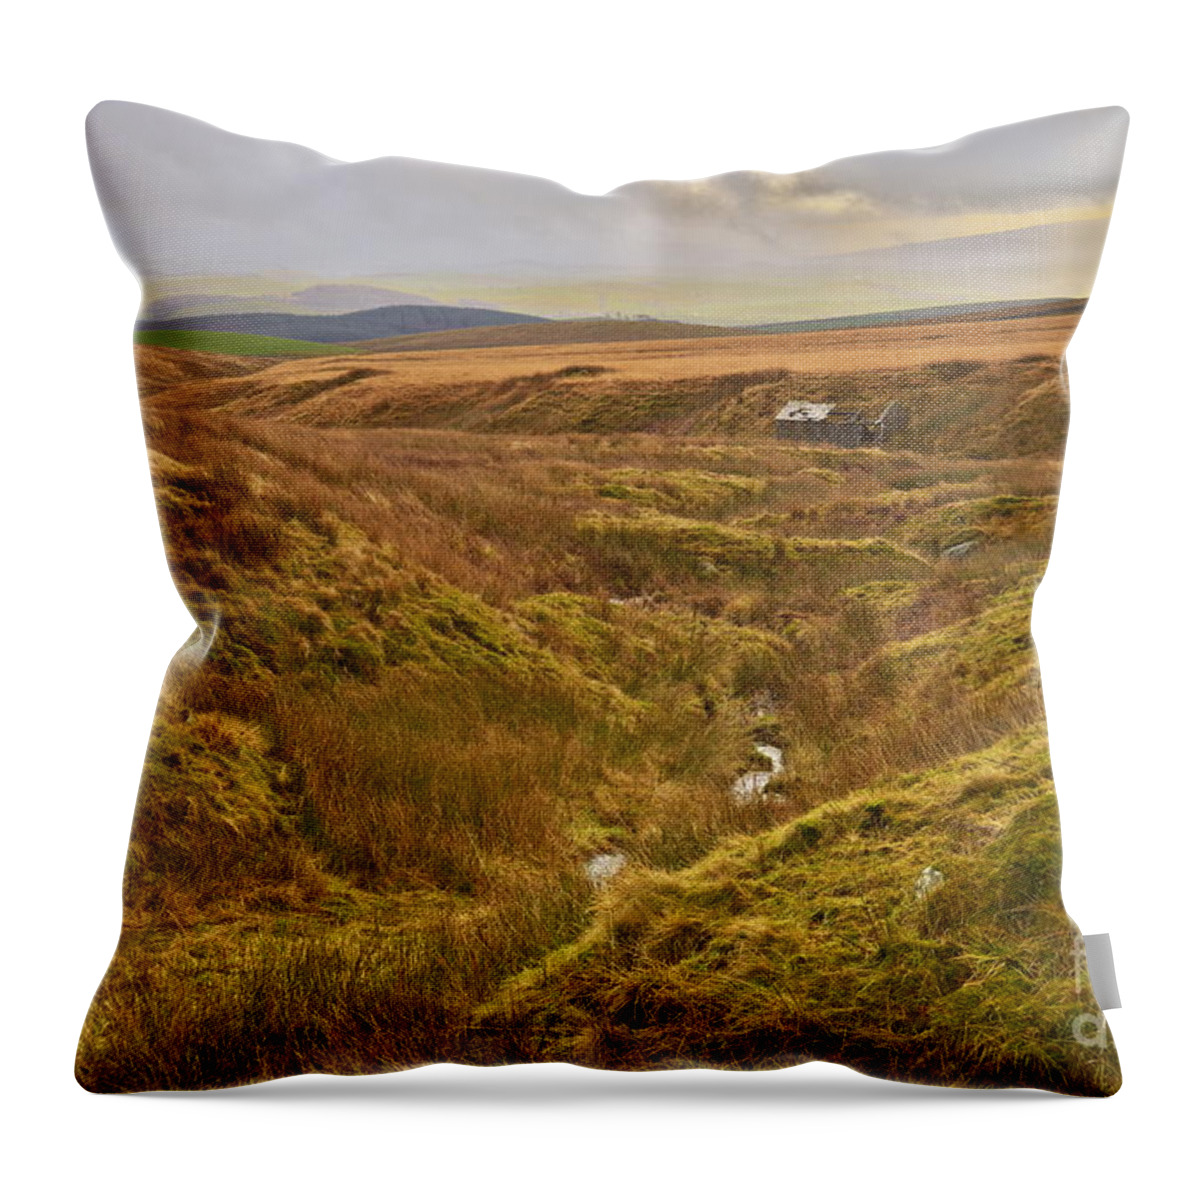 Yorkshire Throw Pillow featuring the photograph Yorkshire Dales Moorland by Martyn Arnold